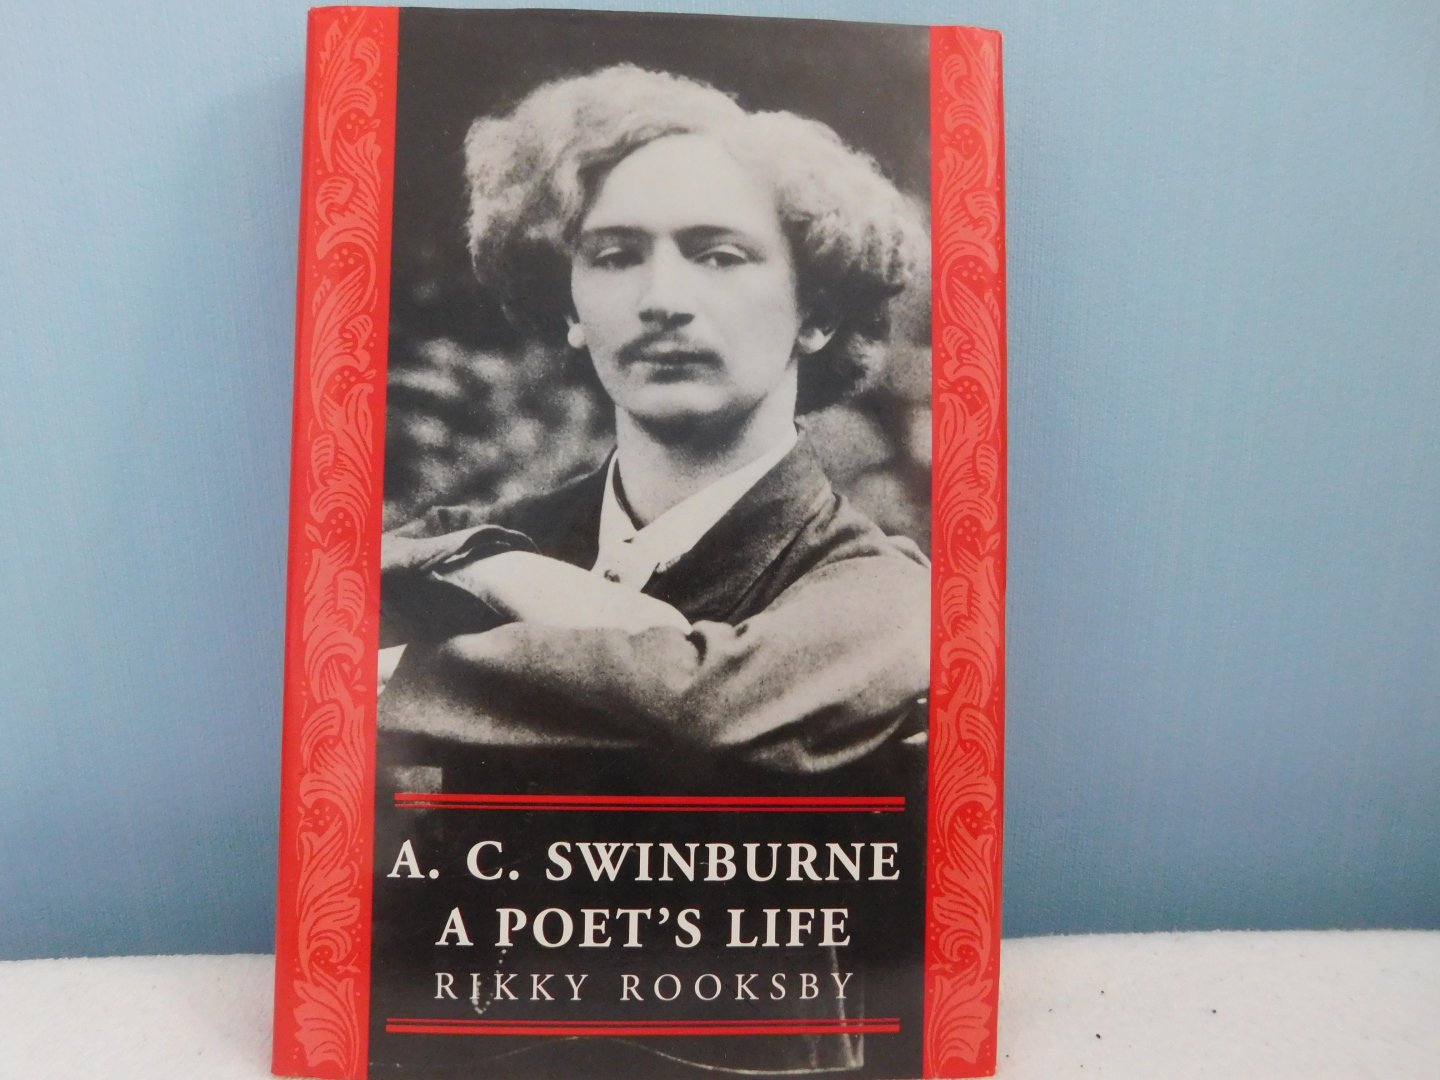 Rooksby, Rikky - A.C. Swinburne / A Poet's Life